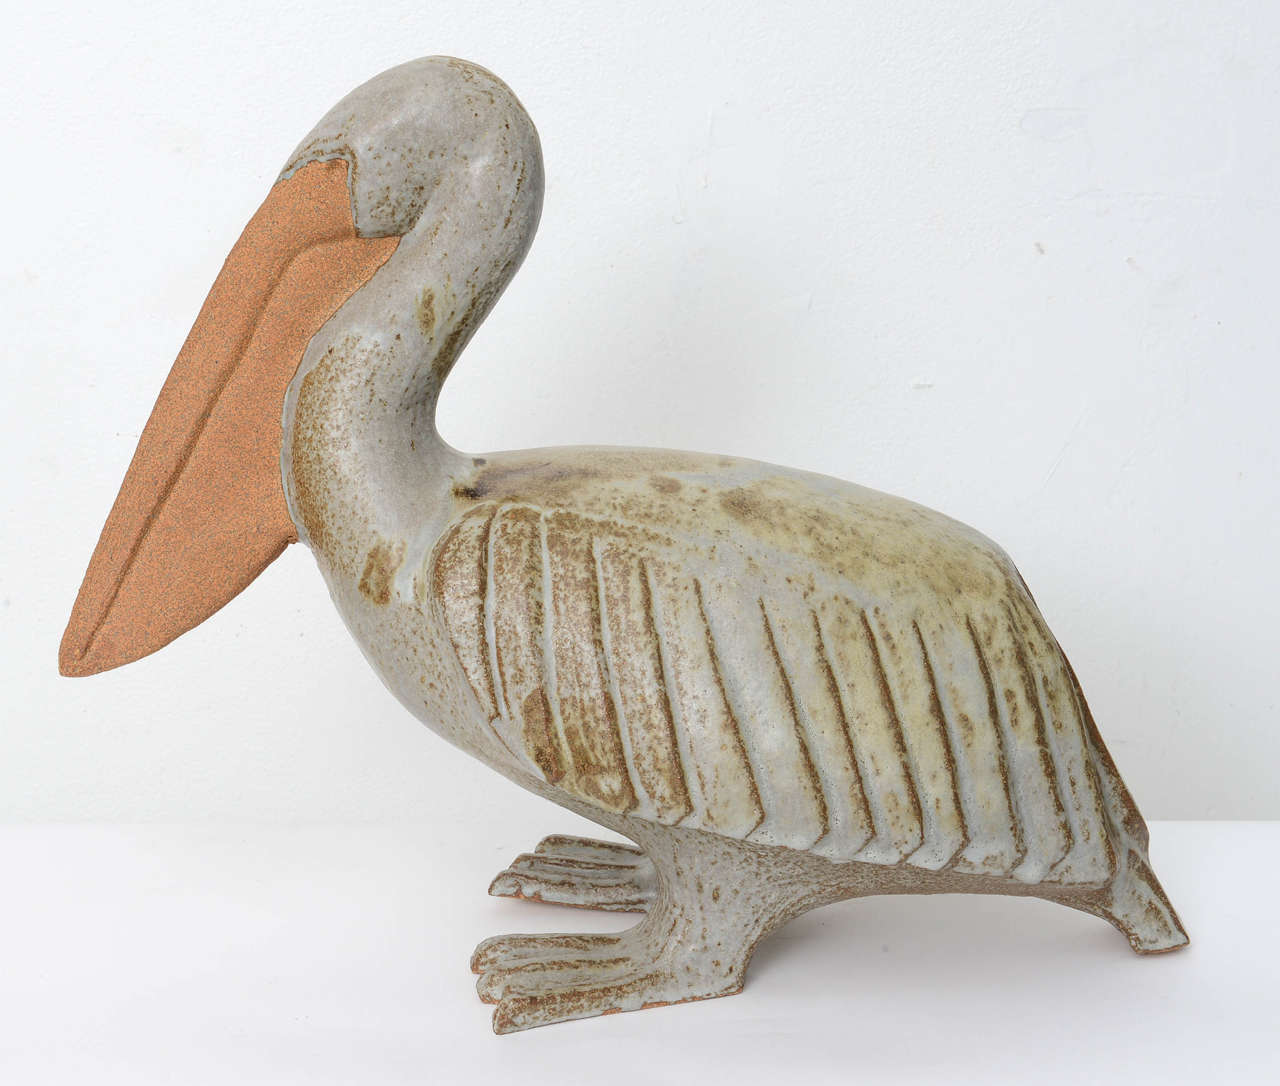 Artisan signed ceramic pelican.

Please feel free to contact us directly for a shipping quote or any additional information by clicking 